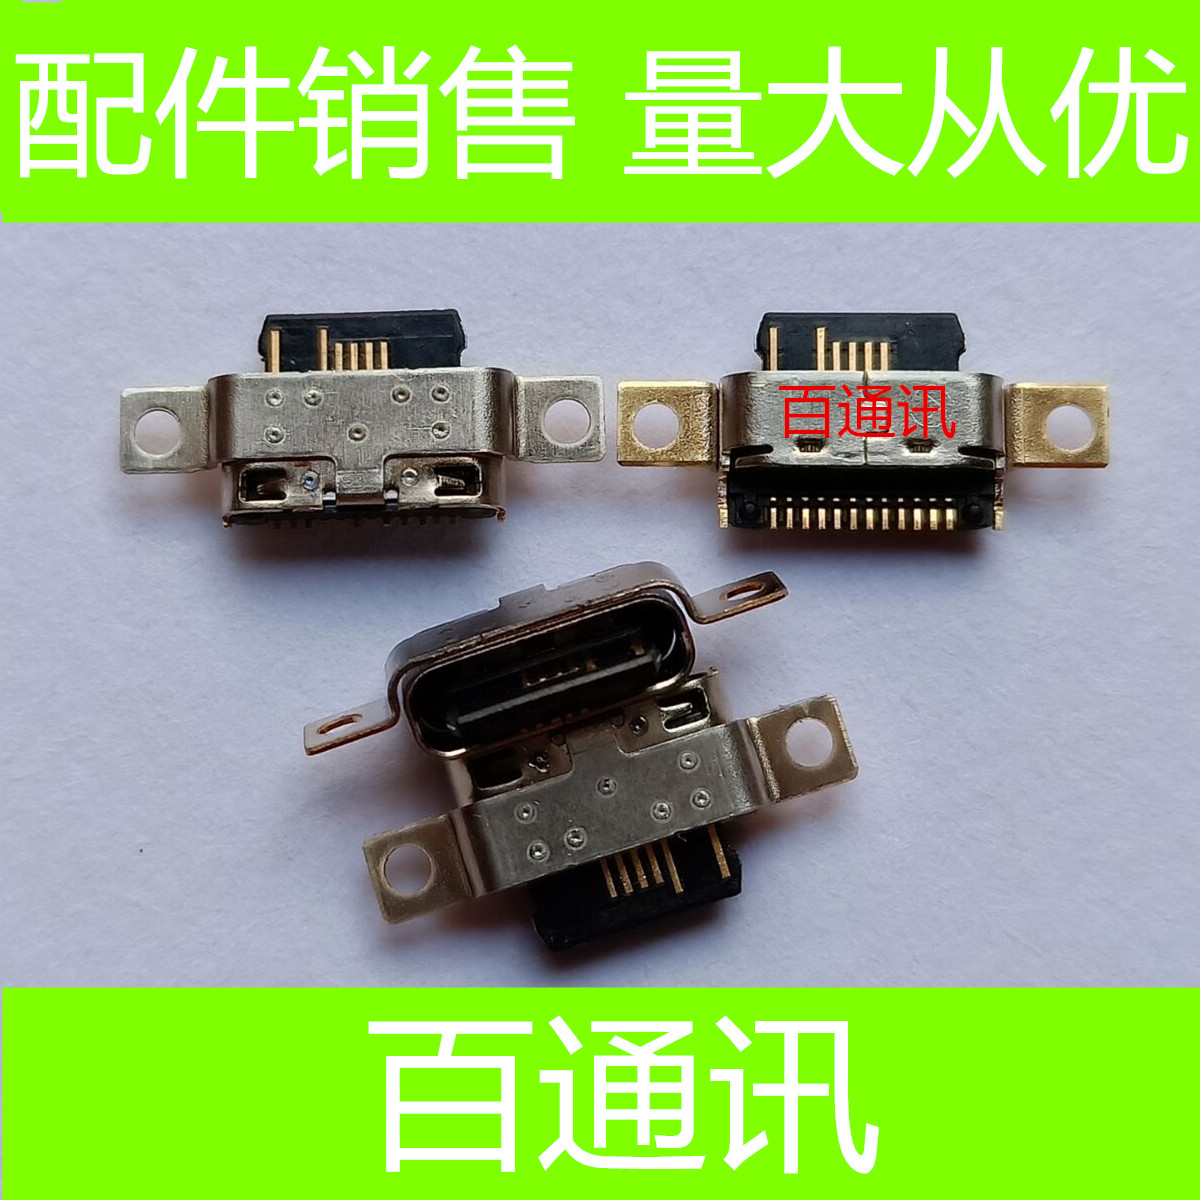 Applicable sea letter H18 Harry HLTE310MTypeC mobile phone tail plug h20 charging connector